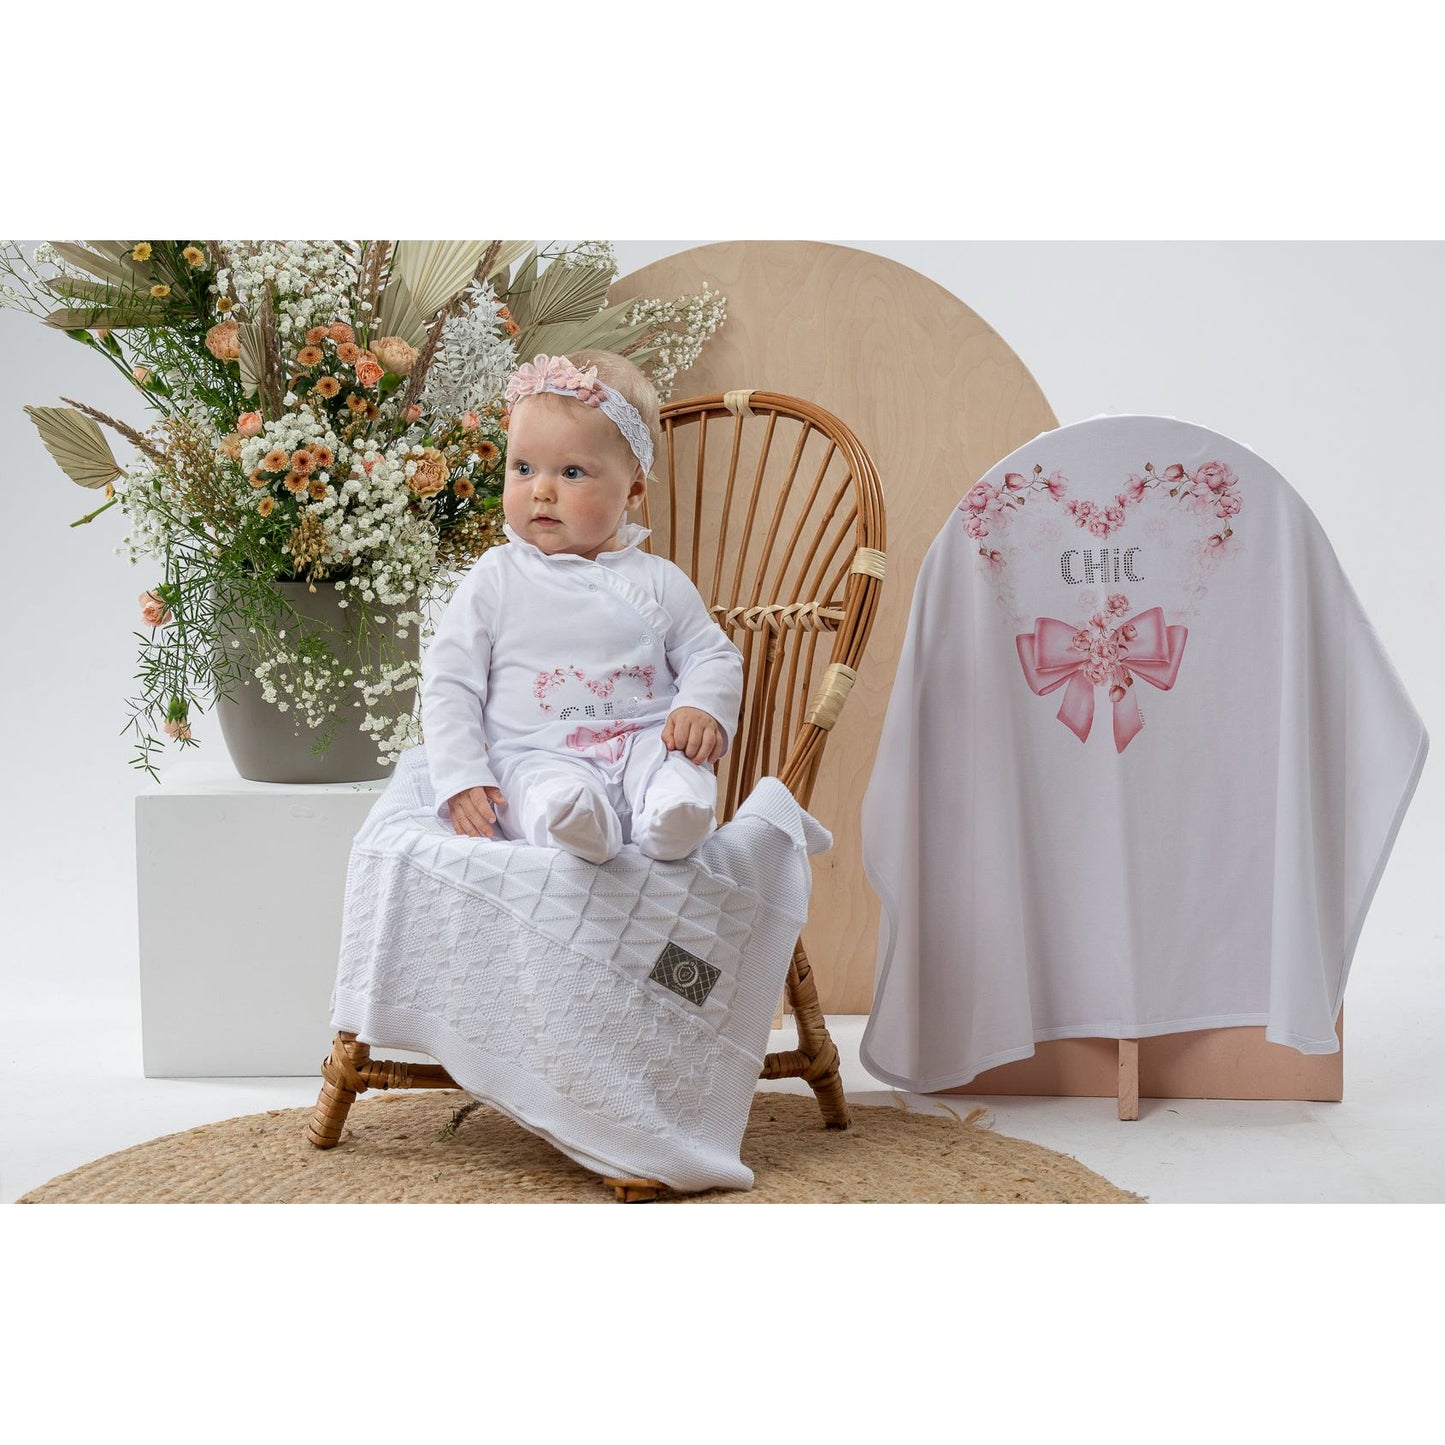 Cute baby grow for baby girls with chic motif by Jamiks - Adora Childrenswear